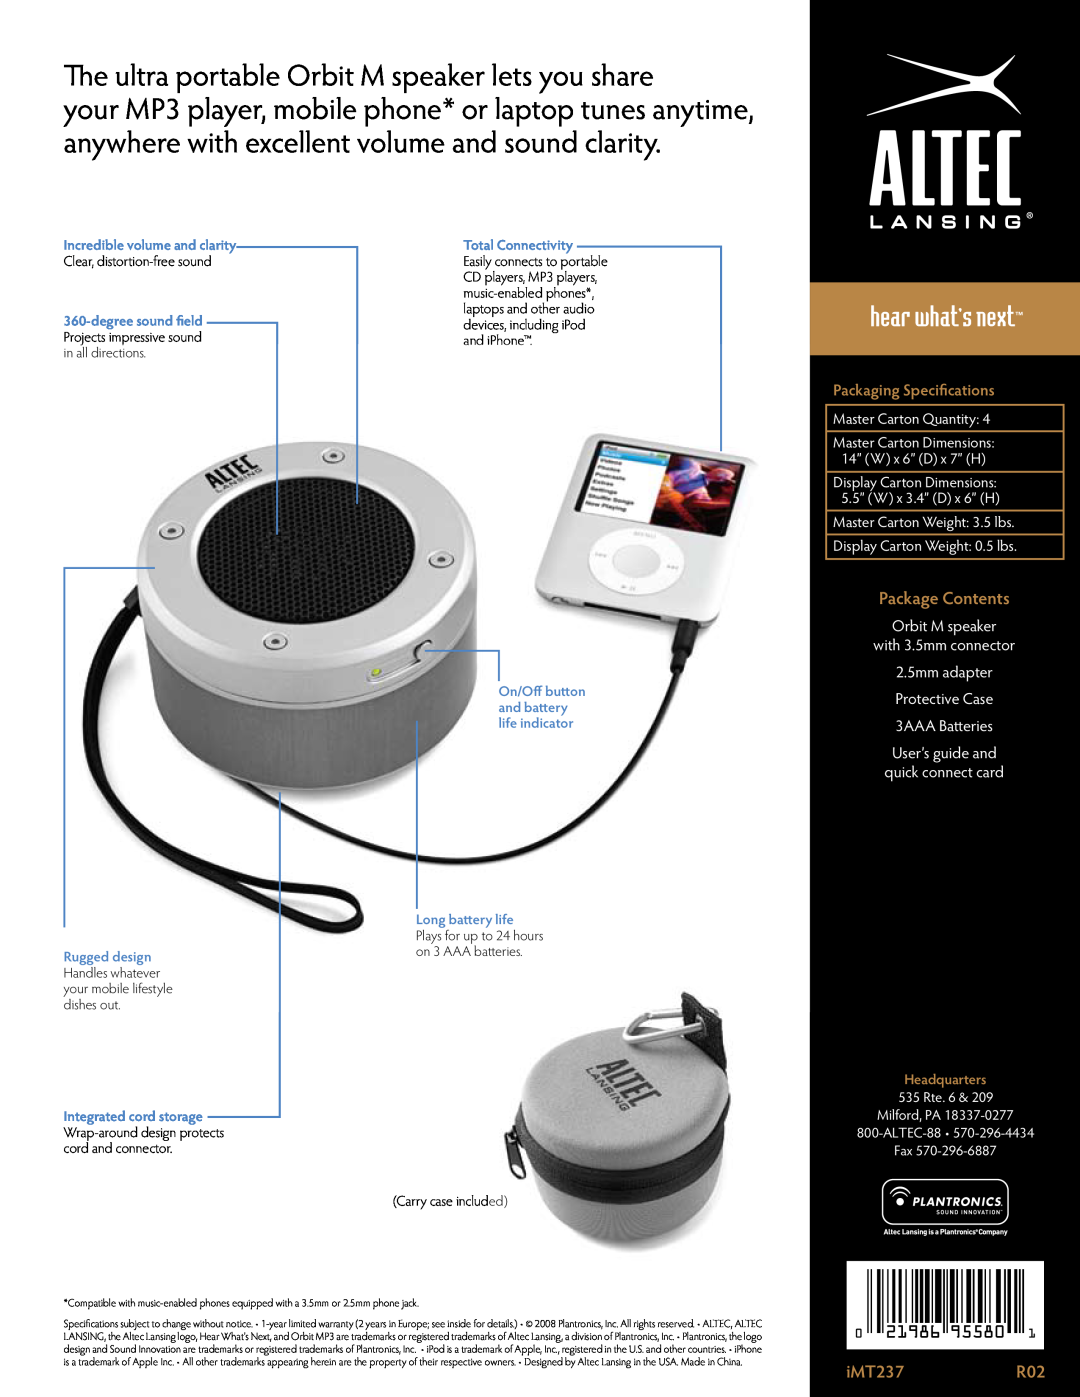 Altec Lansing The ultra portable Orbit M speaker lets you share, Package Contents, iMT237R02, Packaging Specifications 